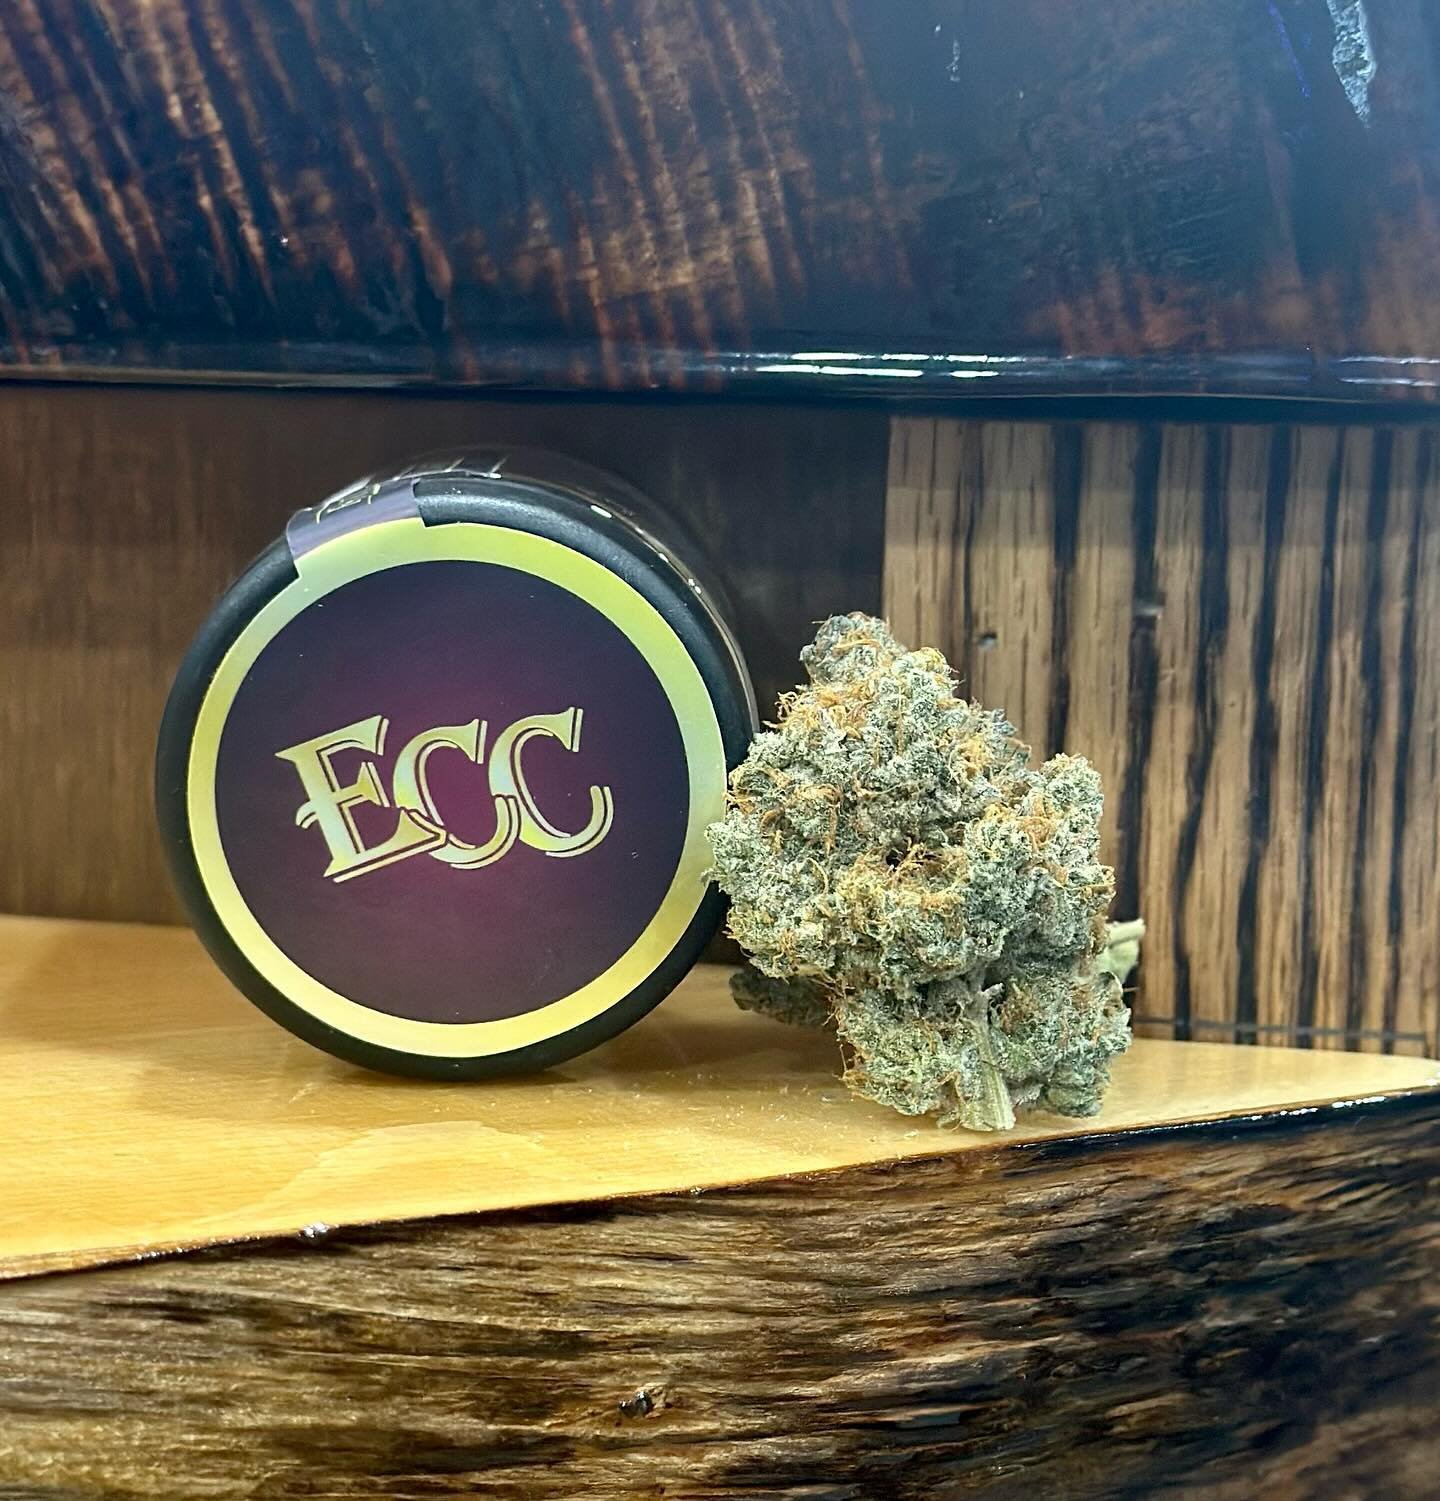 Blutooth |  Wifi OG x Blue Cookies 💙🍪 | Brought to you by East Coast Cure in Bangor ME!
.
.
.
.
NOTHING FOR SALE ON INSTAGRAM, MUST BE 21 YEARS OR OLDER, AMS1183